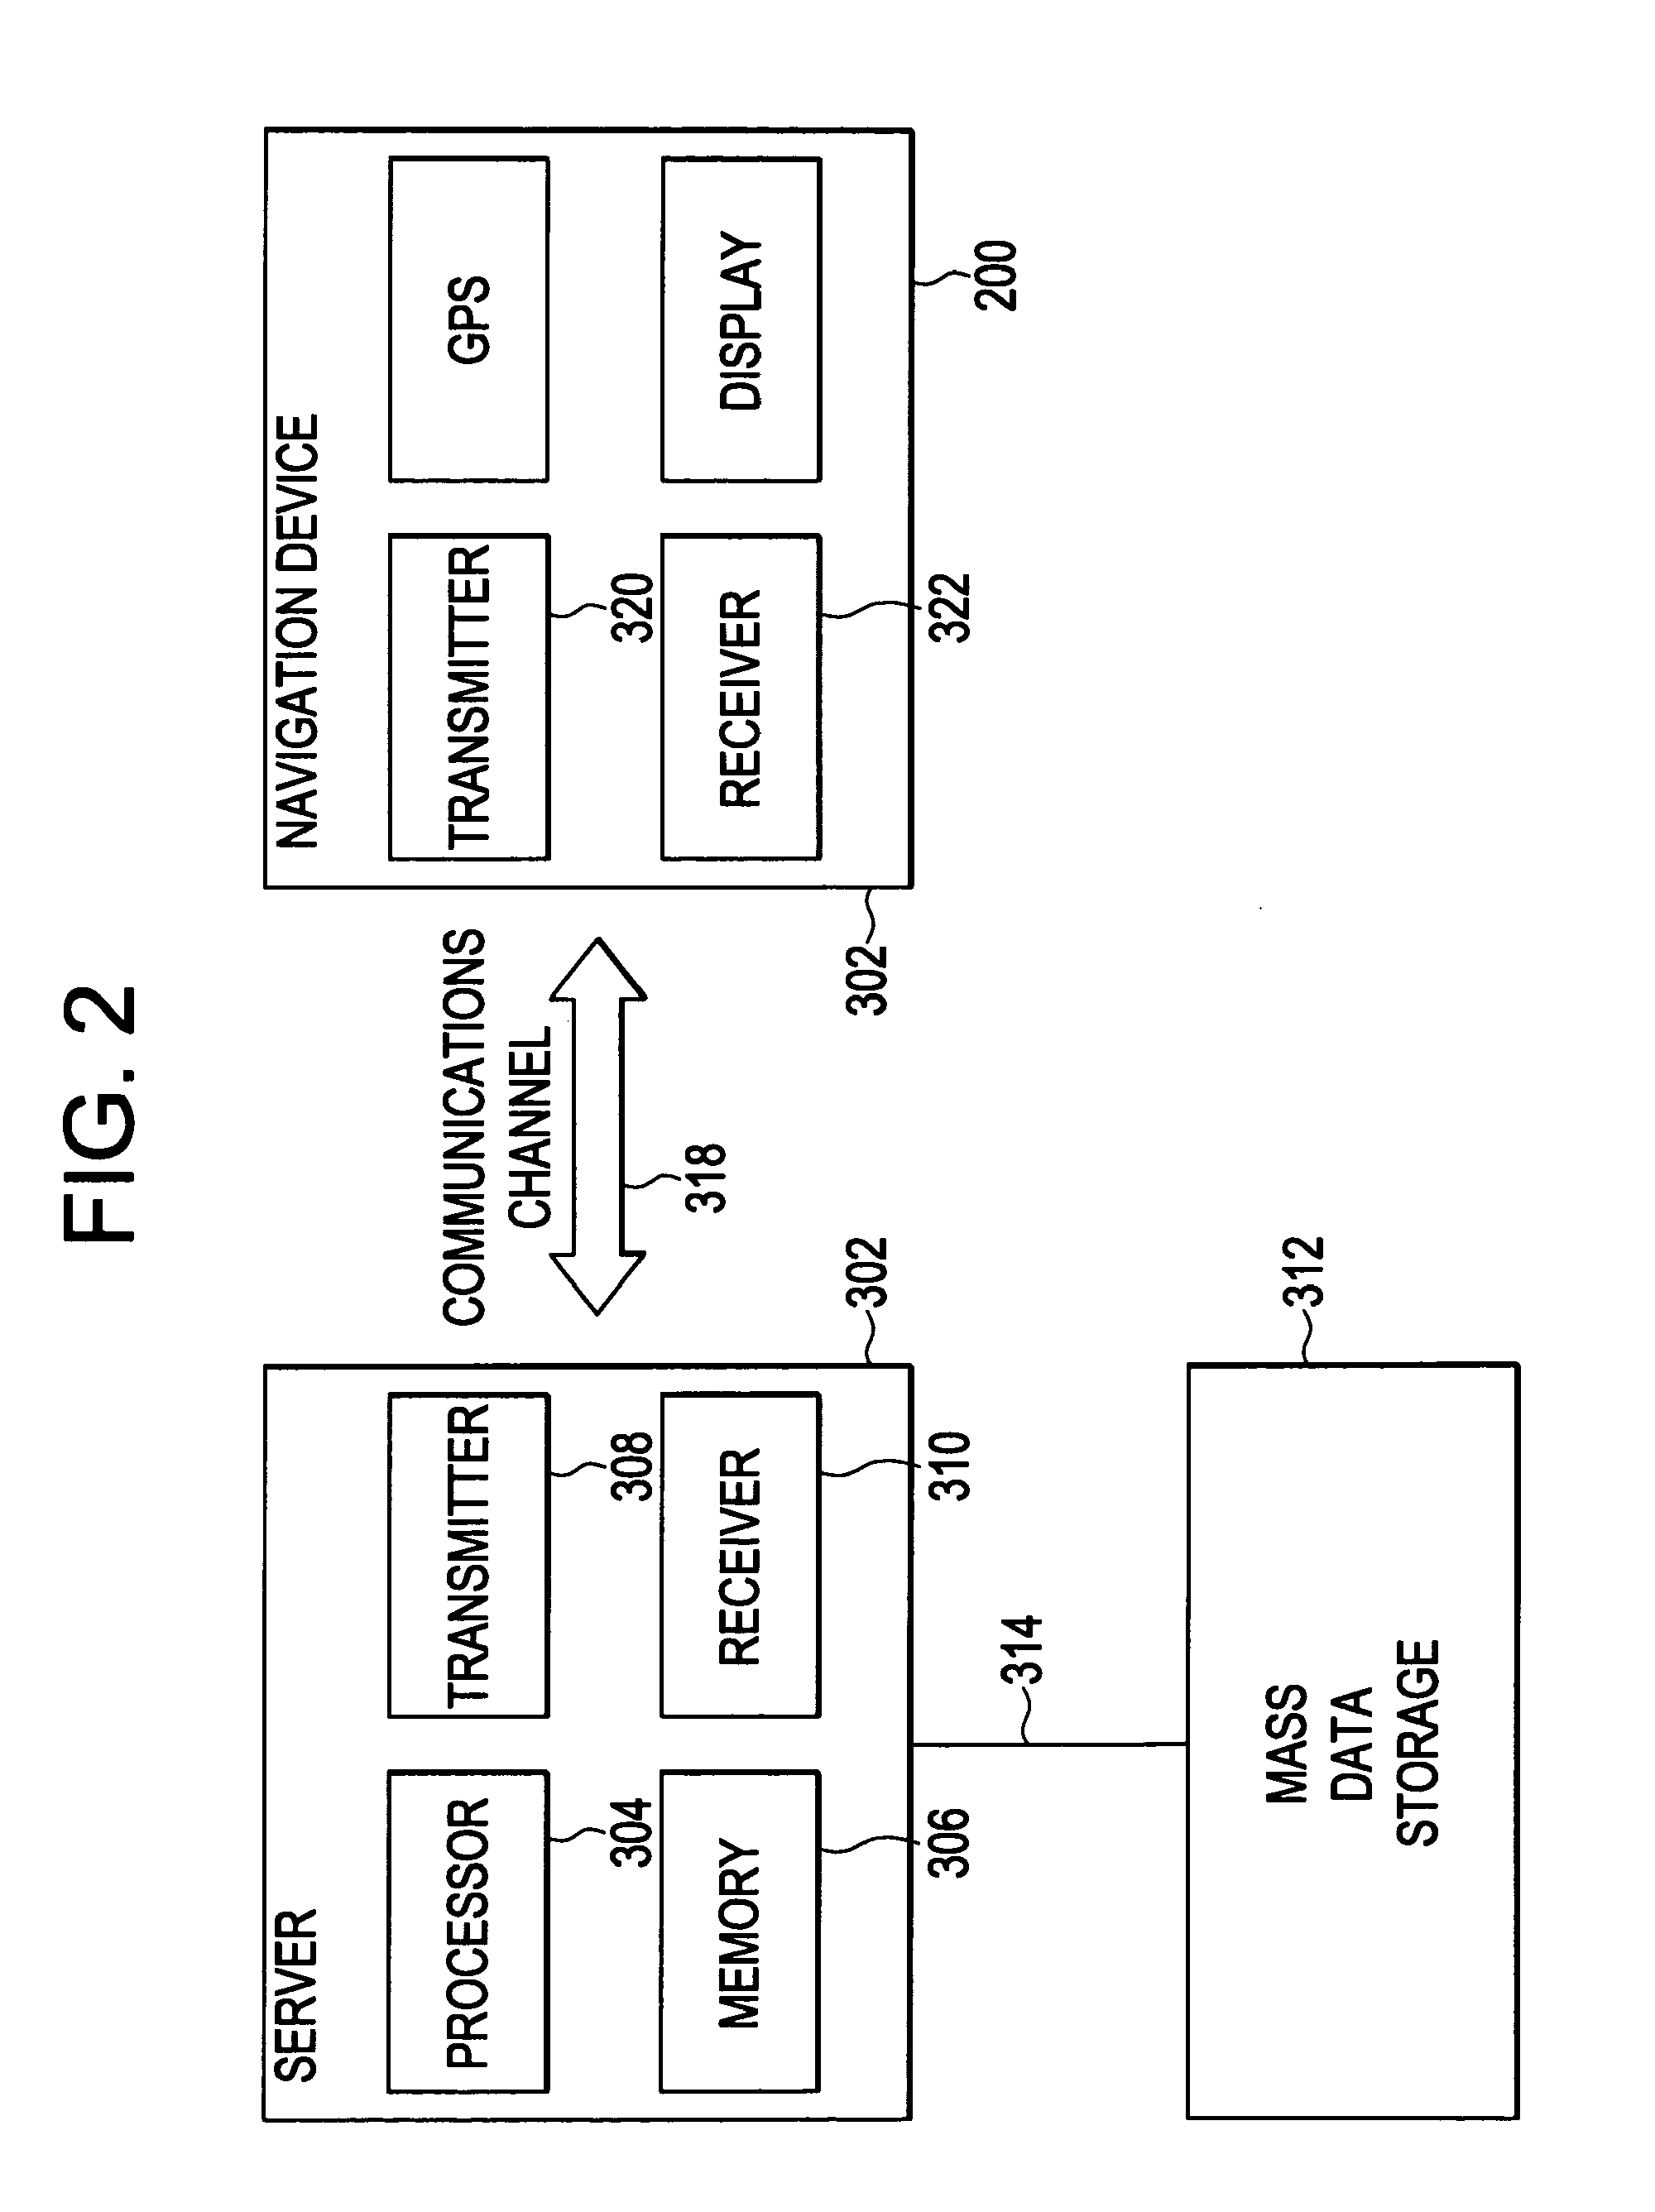 Method and system for transmitting and/or receiving at least one location reference, enhanced by at least one focusing factor